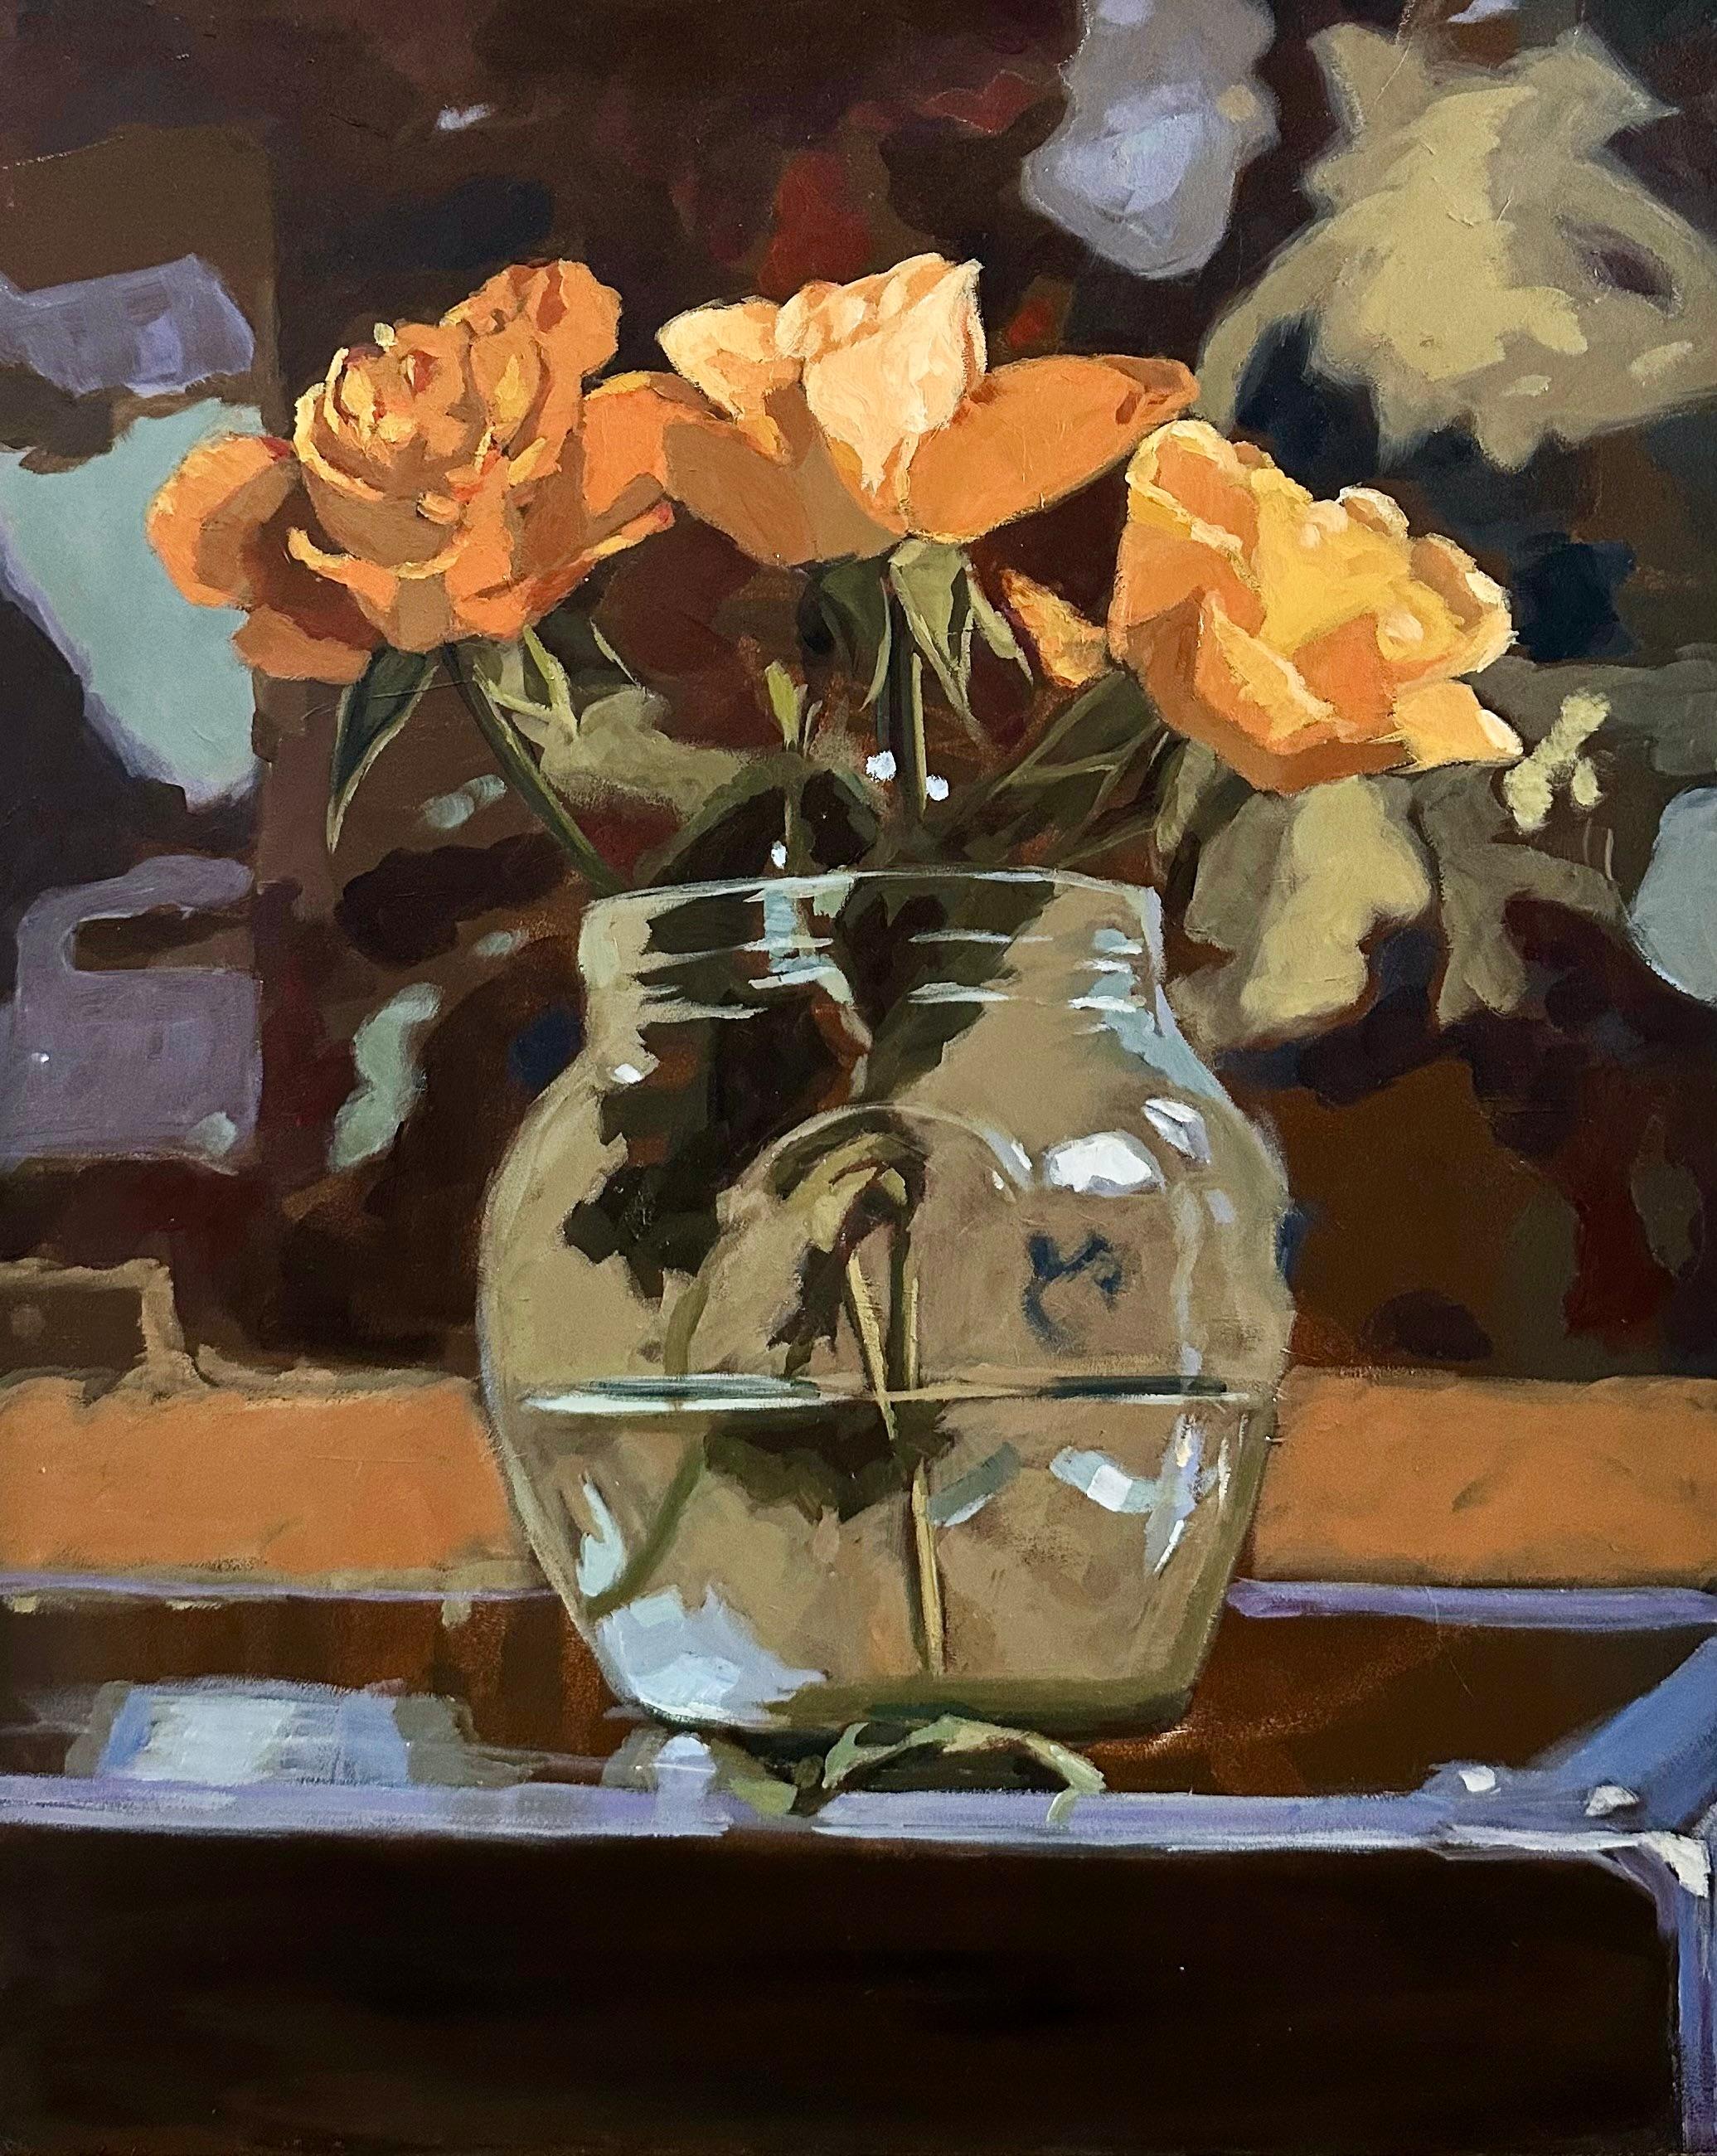 Mitzy Renooy Figurative Painting - Orange Roses- 21st Century flower painting with yellow roses